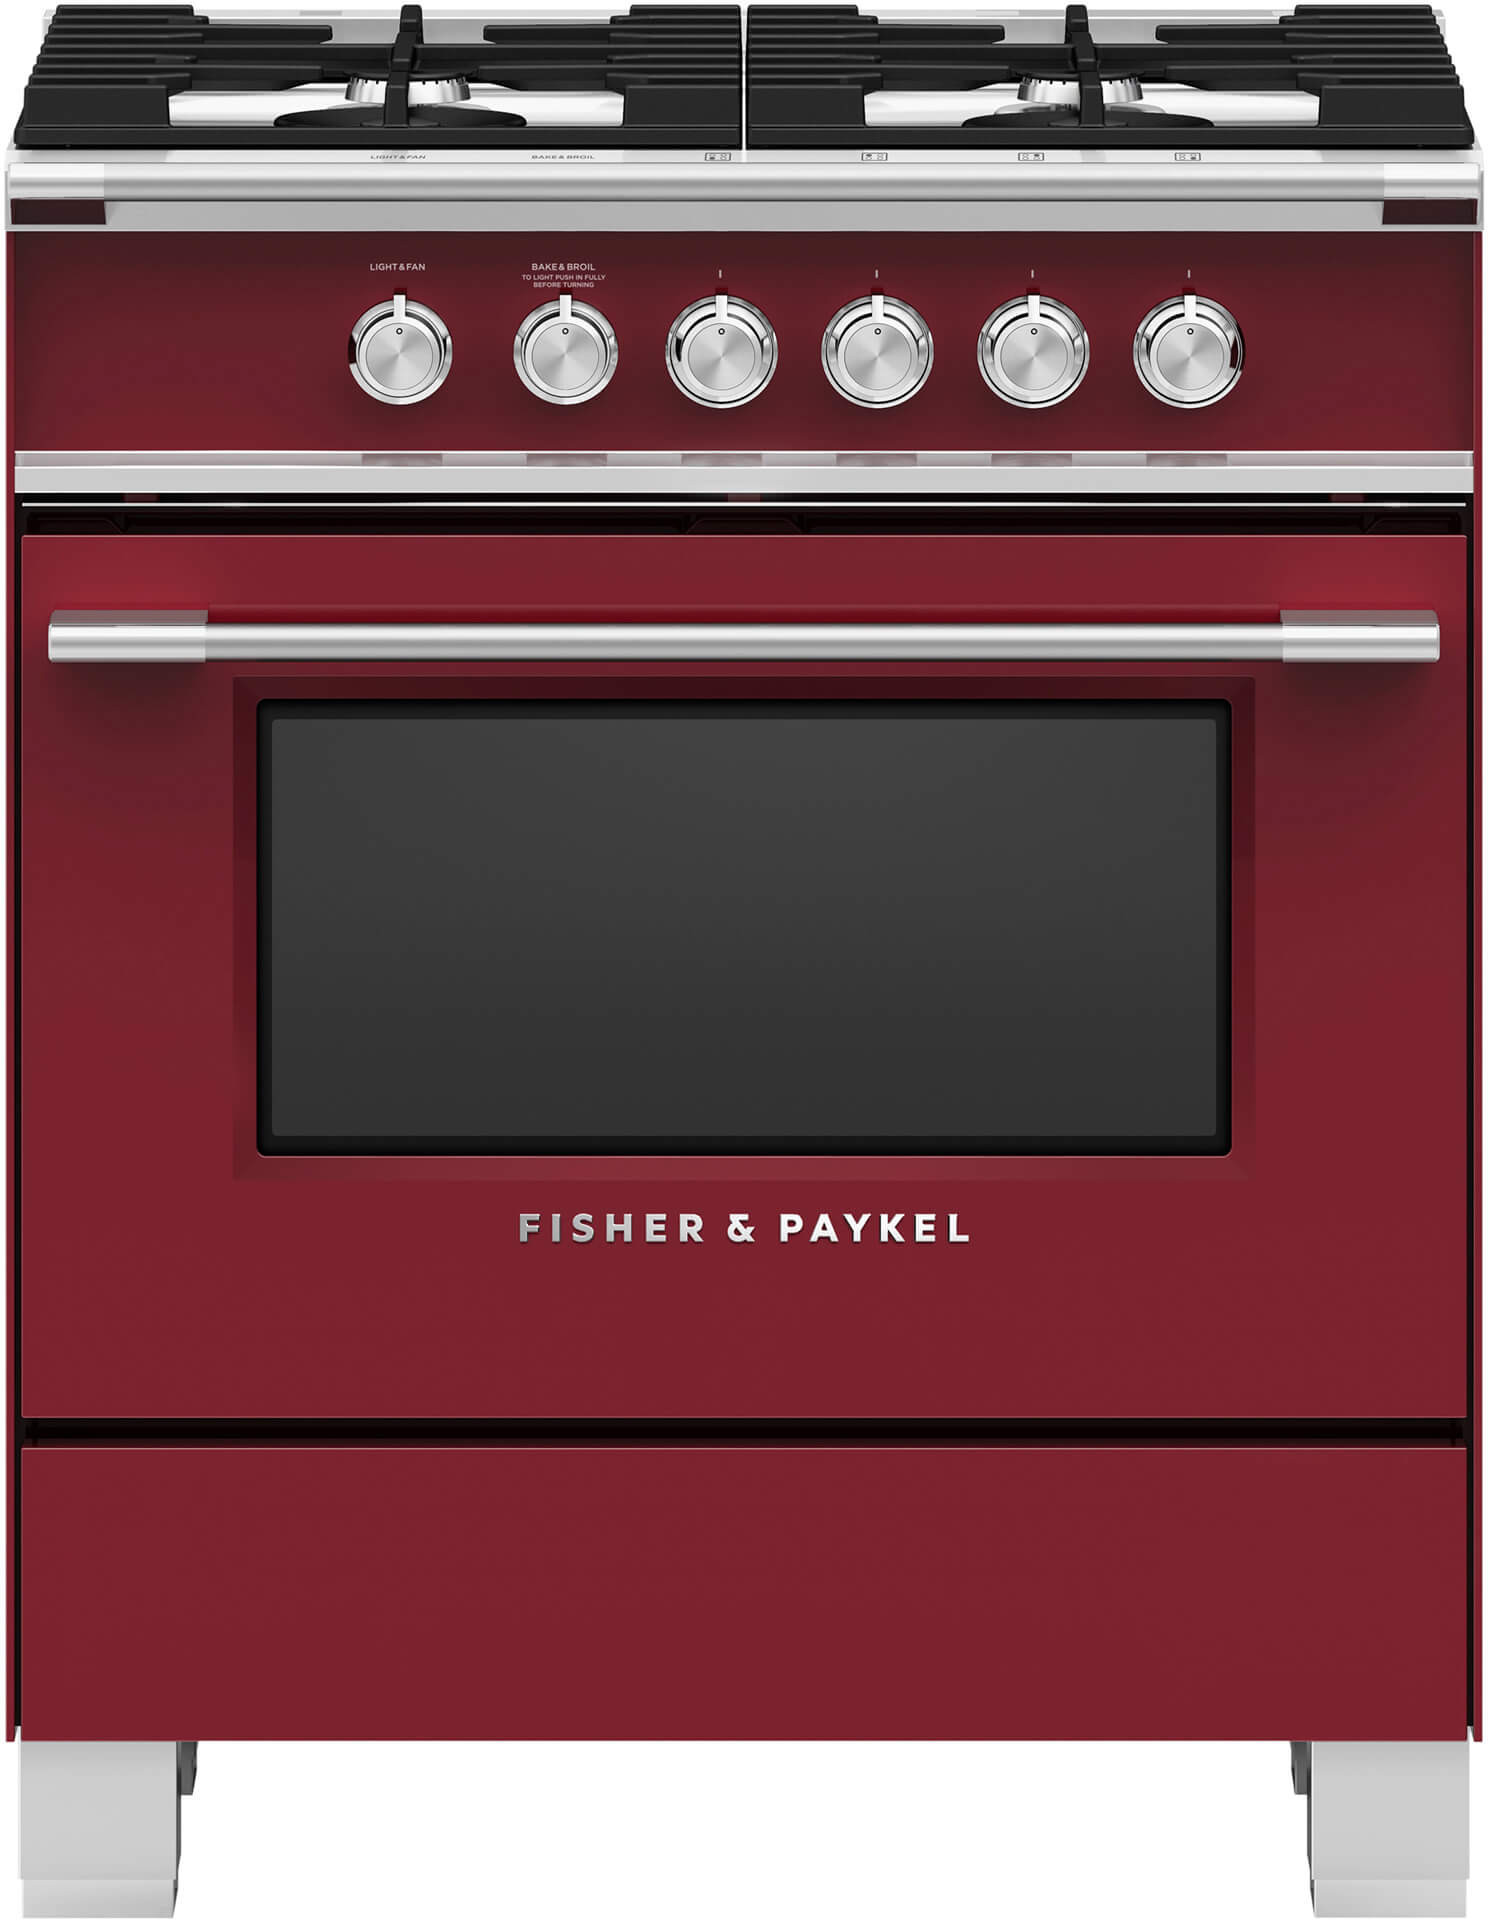 Fisher & Paykel Series 7 classic 30 Freestanding Natural Gas Range OR30SCG4R1